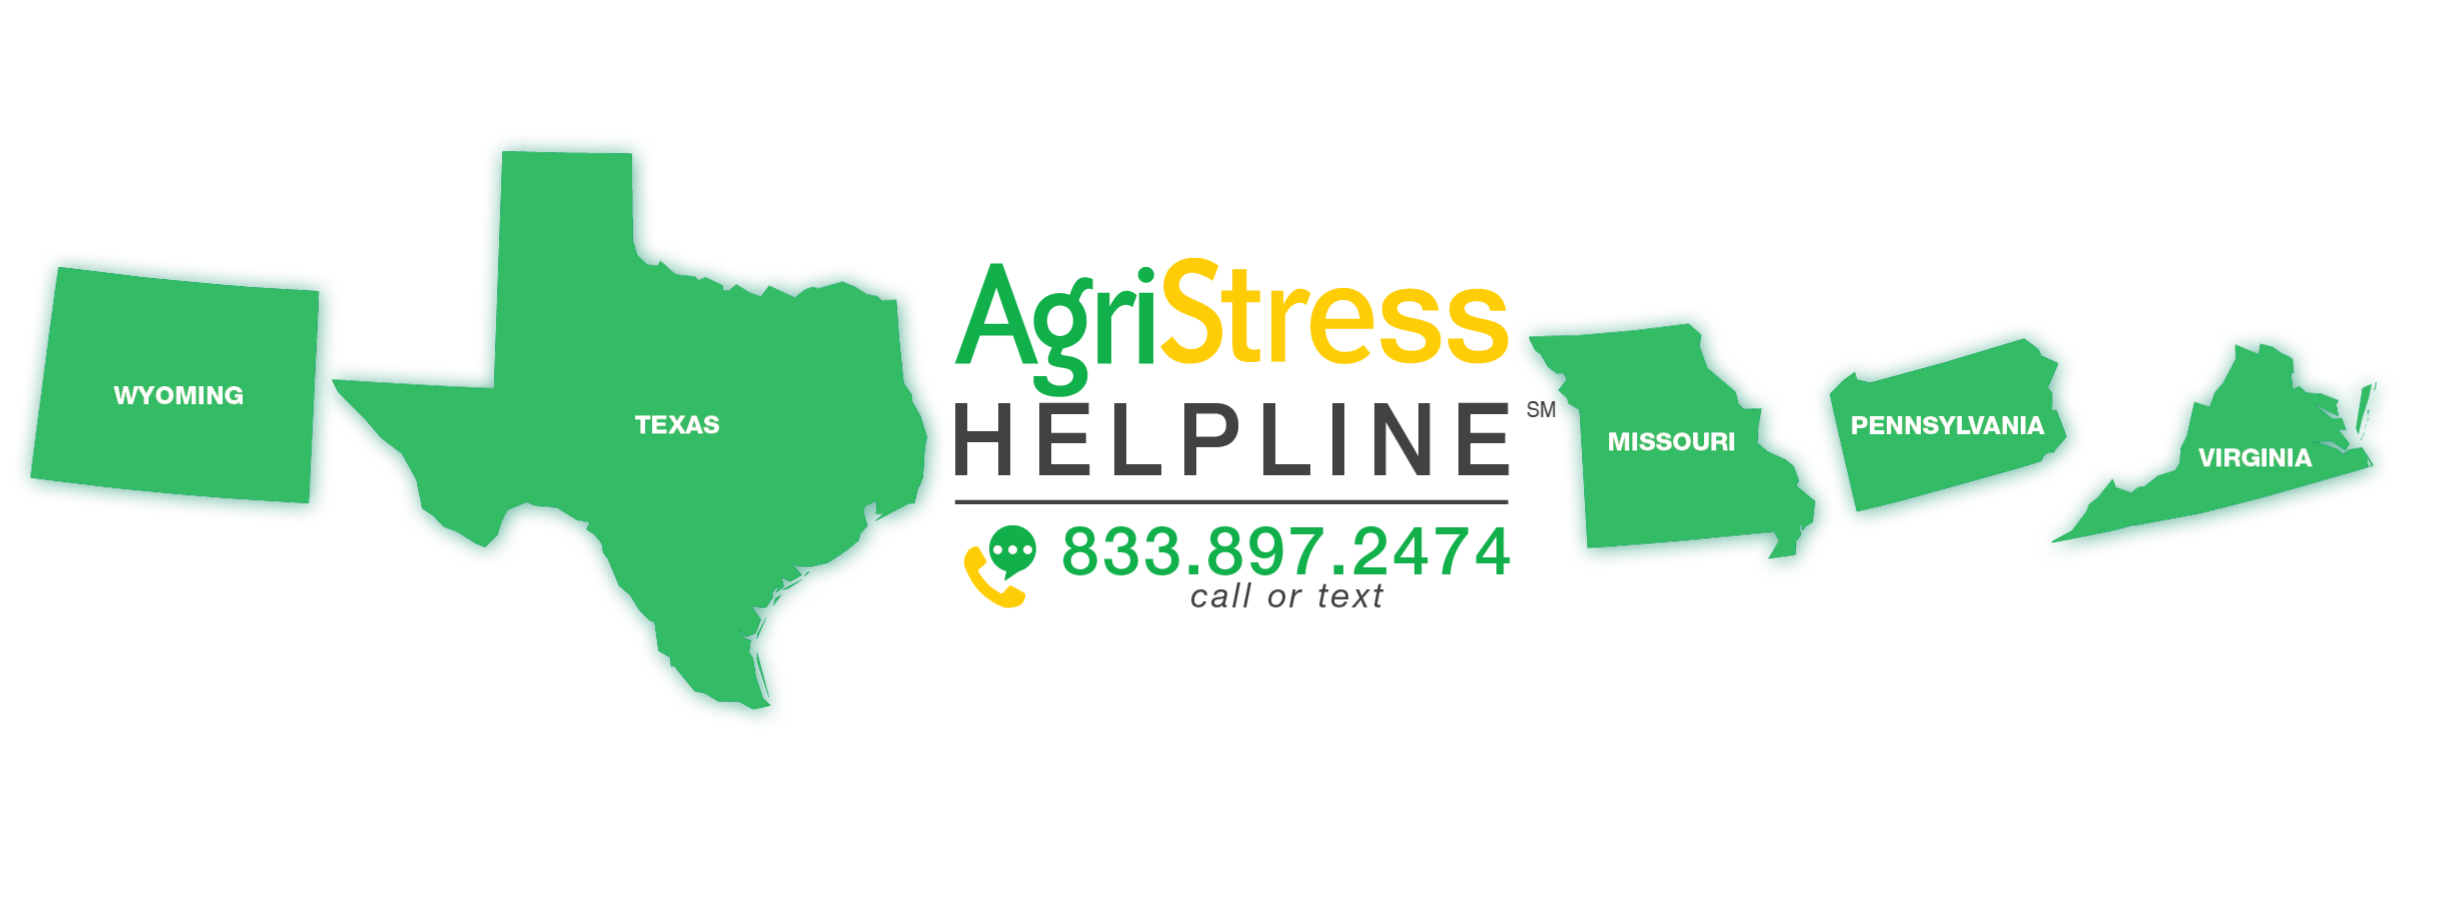 AgriStress helpline. Call or text 833-897-2474.